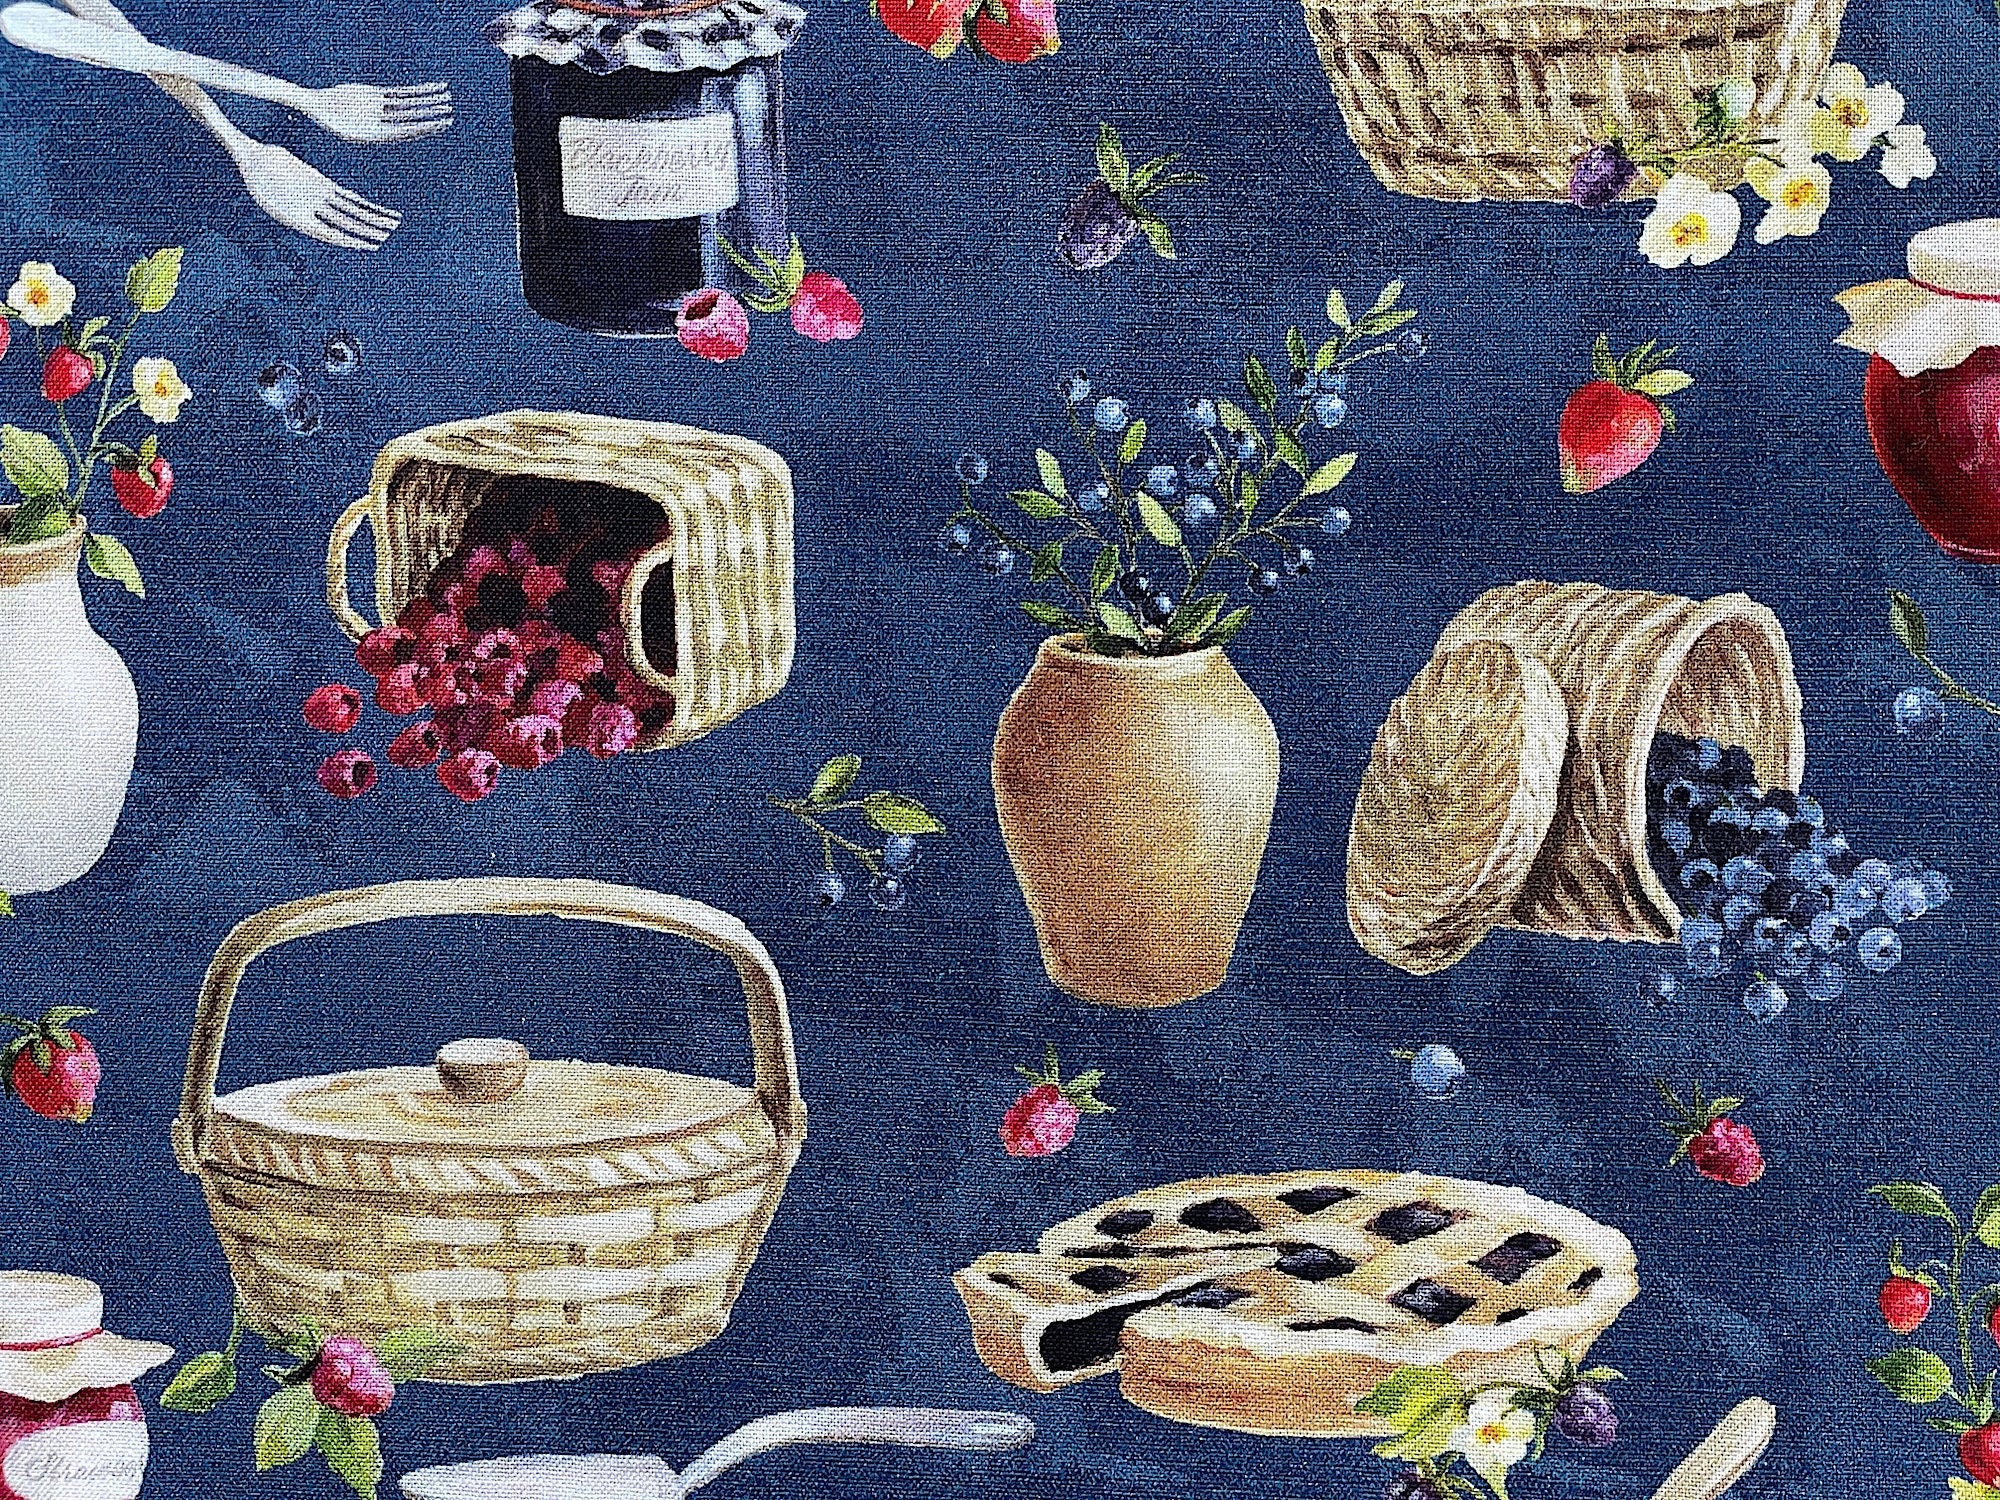 Close up of blue cotton fabric covered with pies, blueberries, raspberries and more.